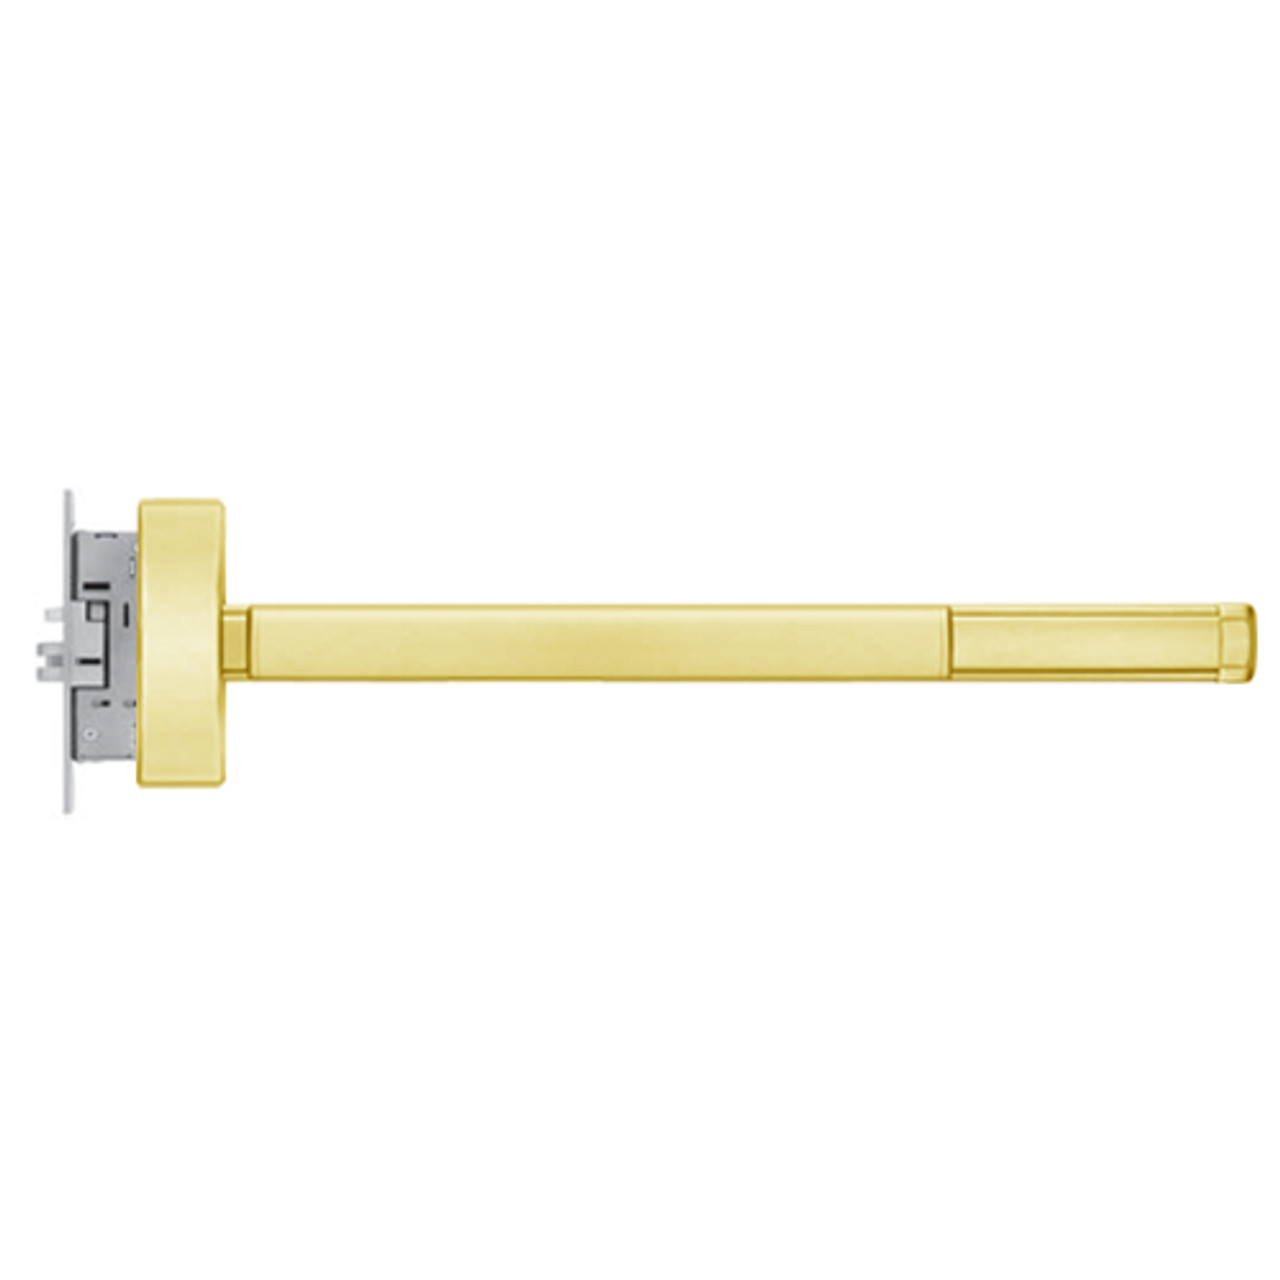 TS2301-LHR-605-48 PHI 2300 Series Apex Mortise Exit Device with Touchbar Monitoring Switch Prepped for Cover Plate in Bright Brass Finish